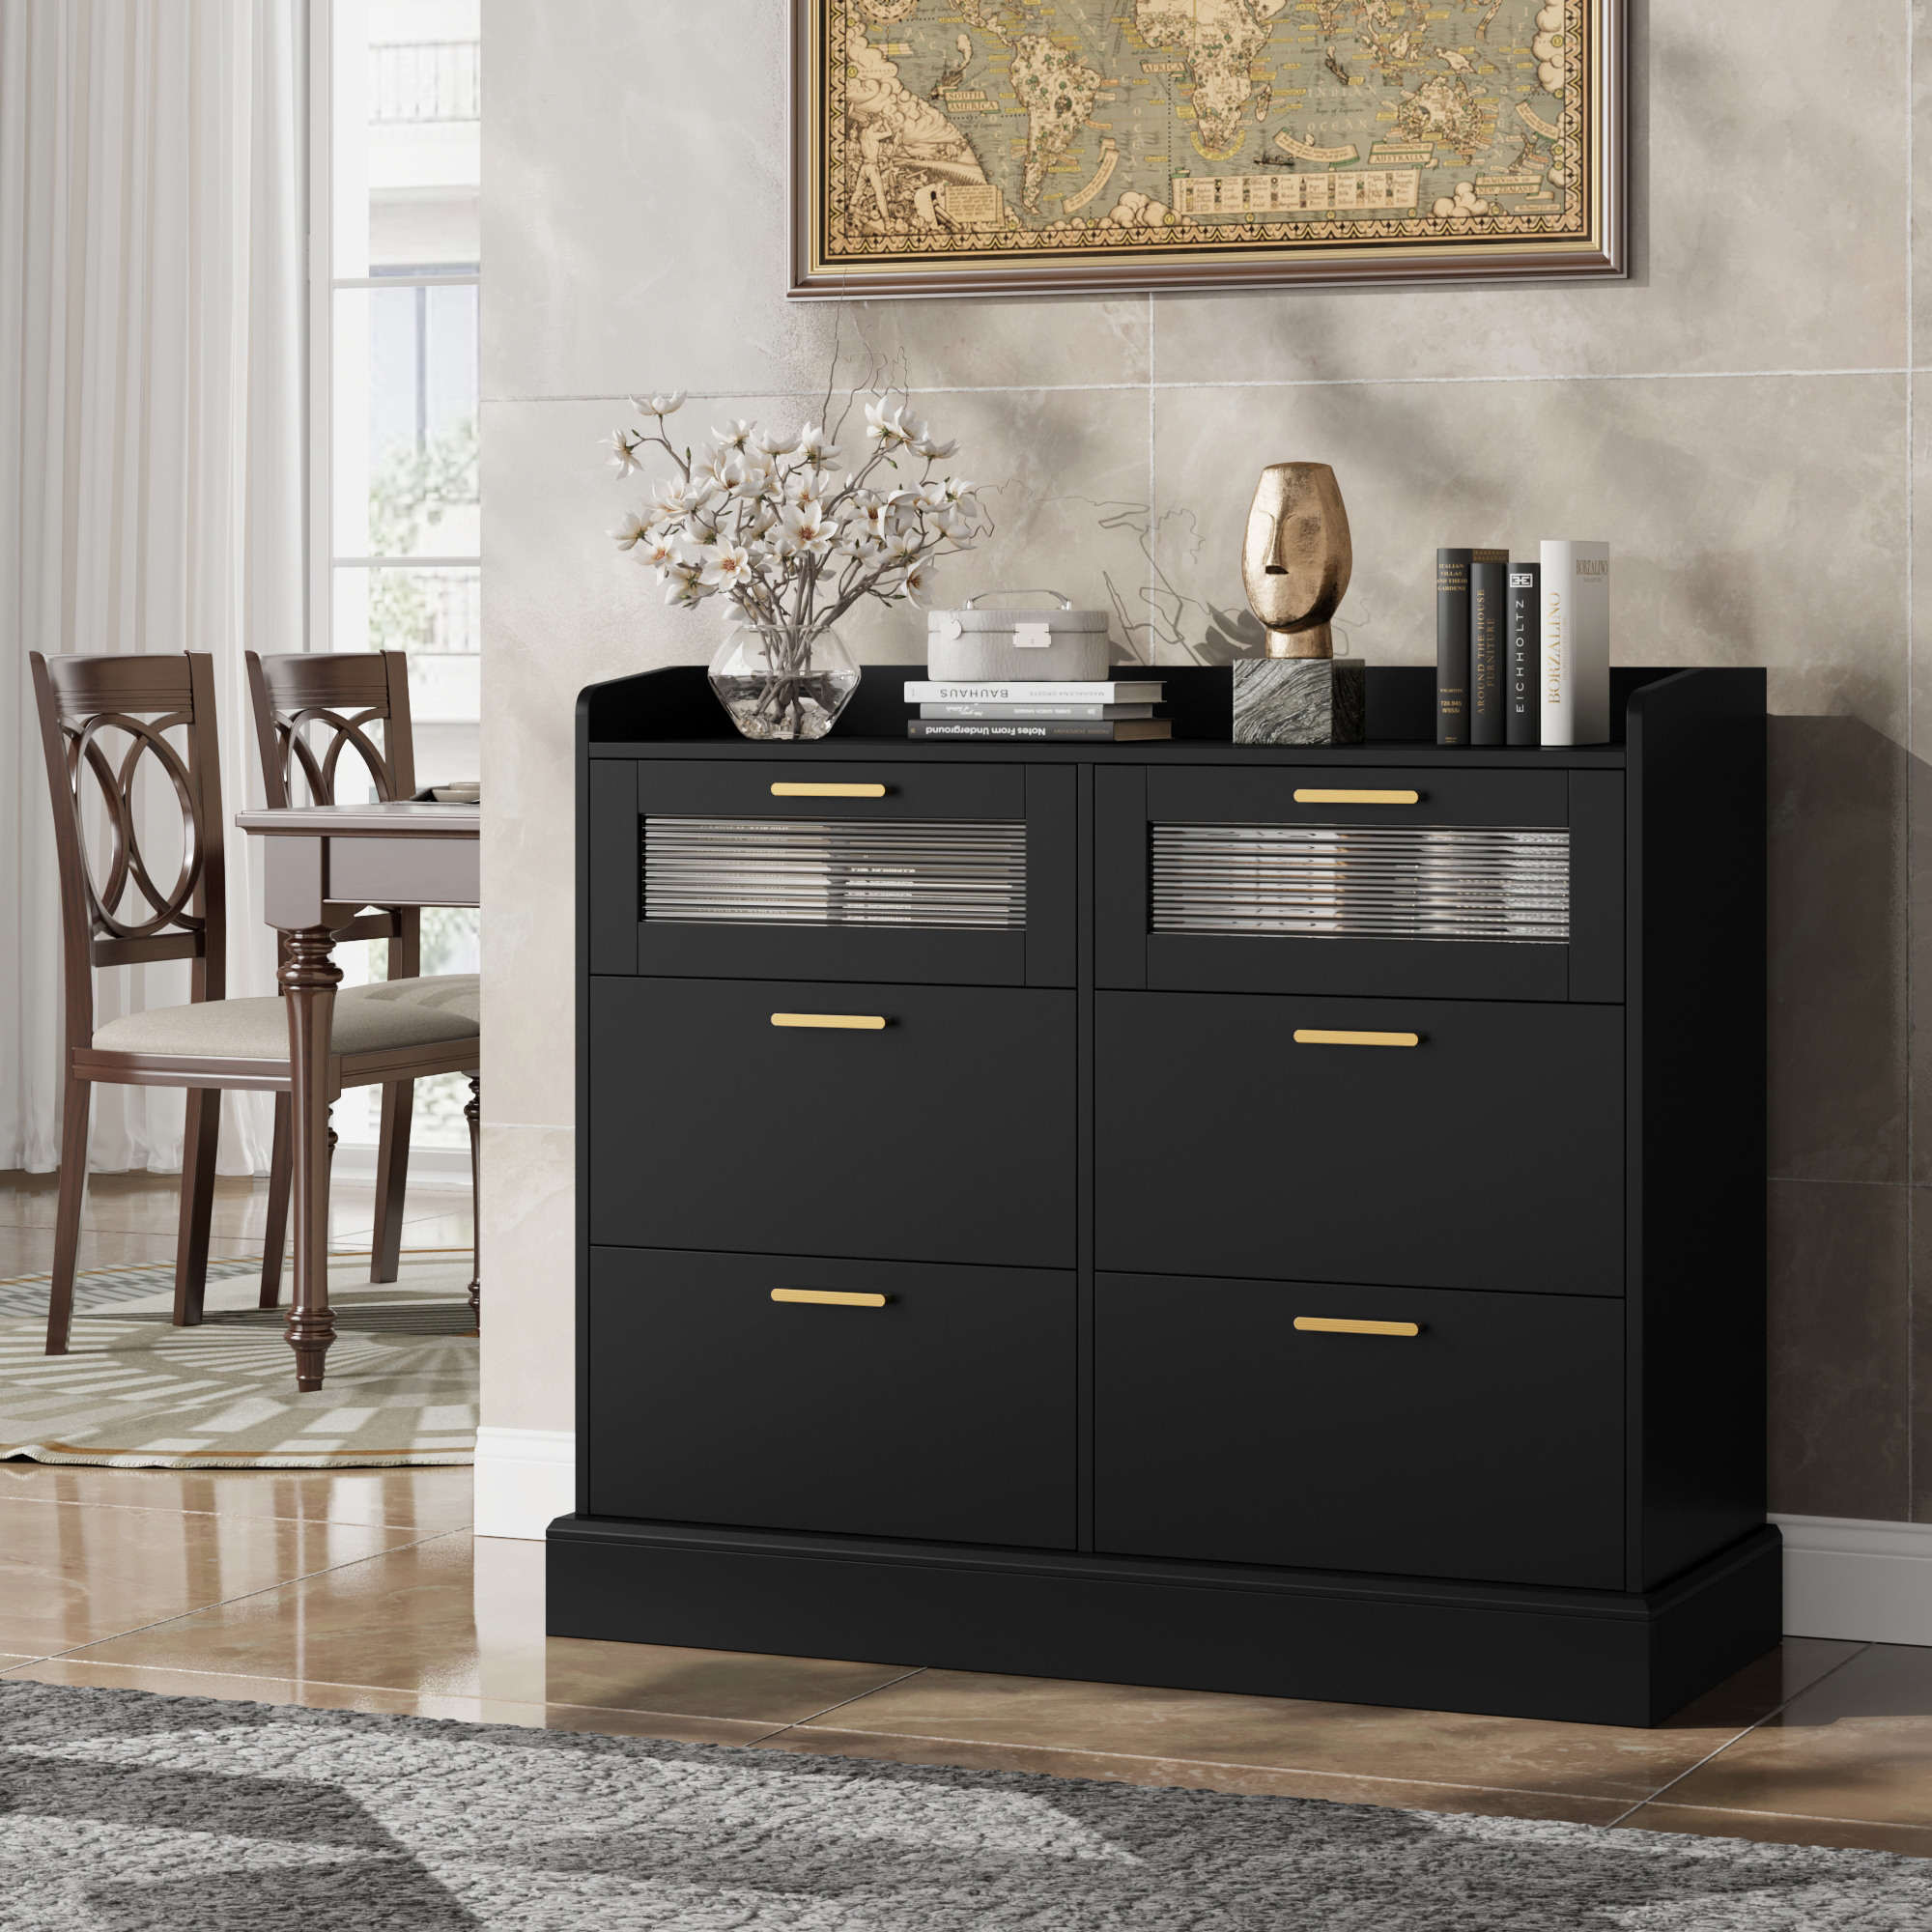 Homfa 6 Drawer Double Dresser with Fence, Chest of Drawers with Wavy Glass, Wooden Storage Cabinet for Bedroom, Black - image 5 of 7